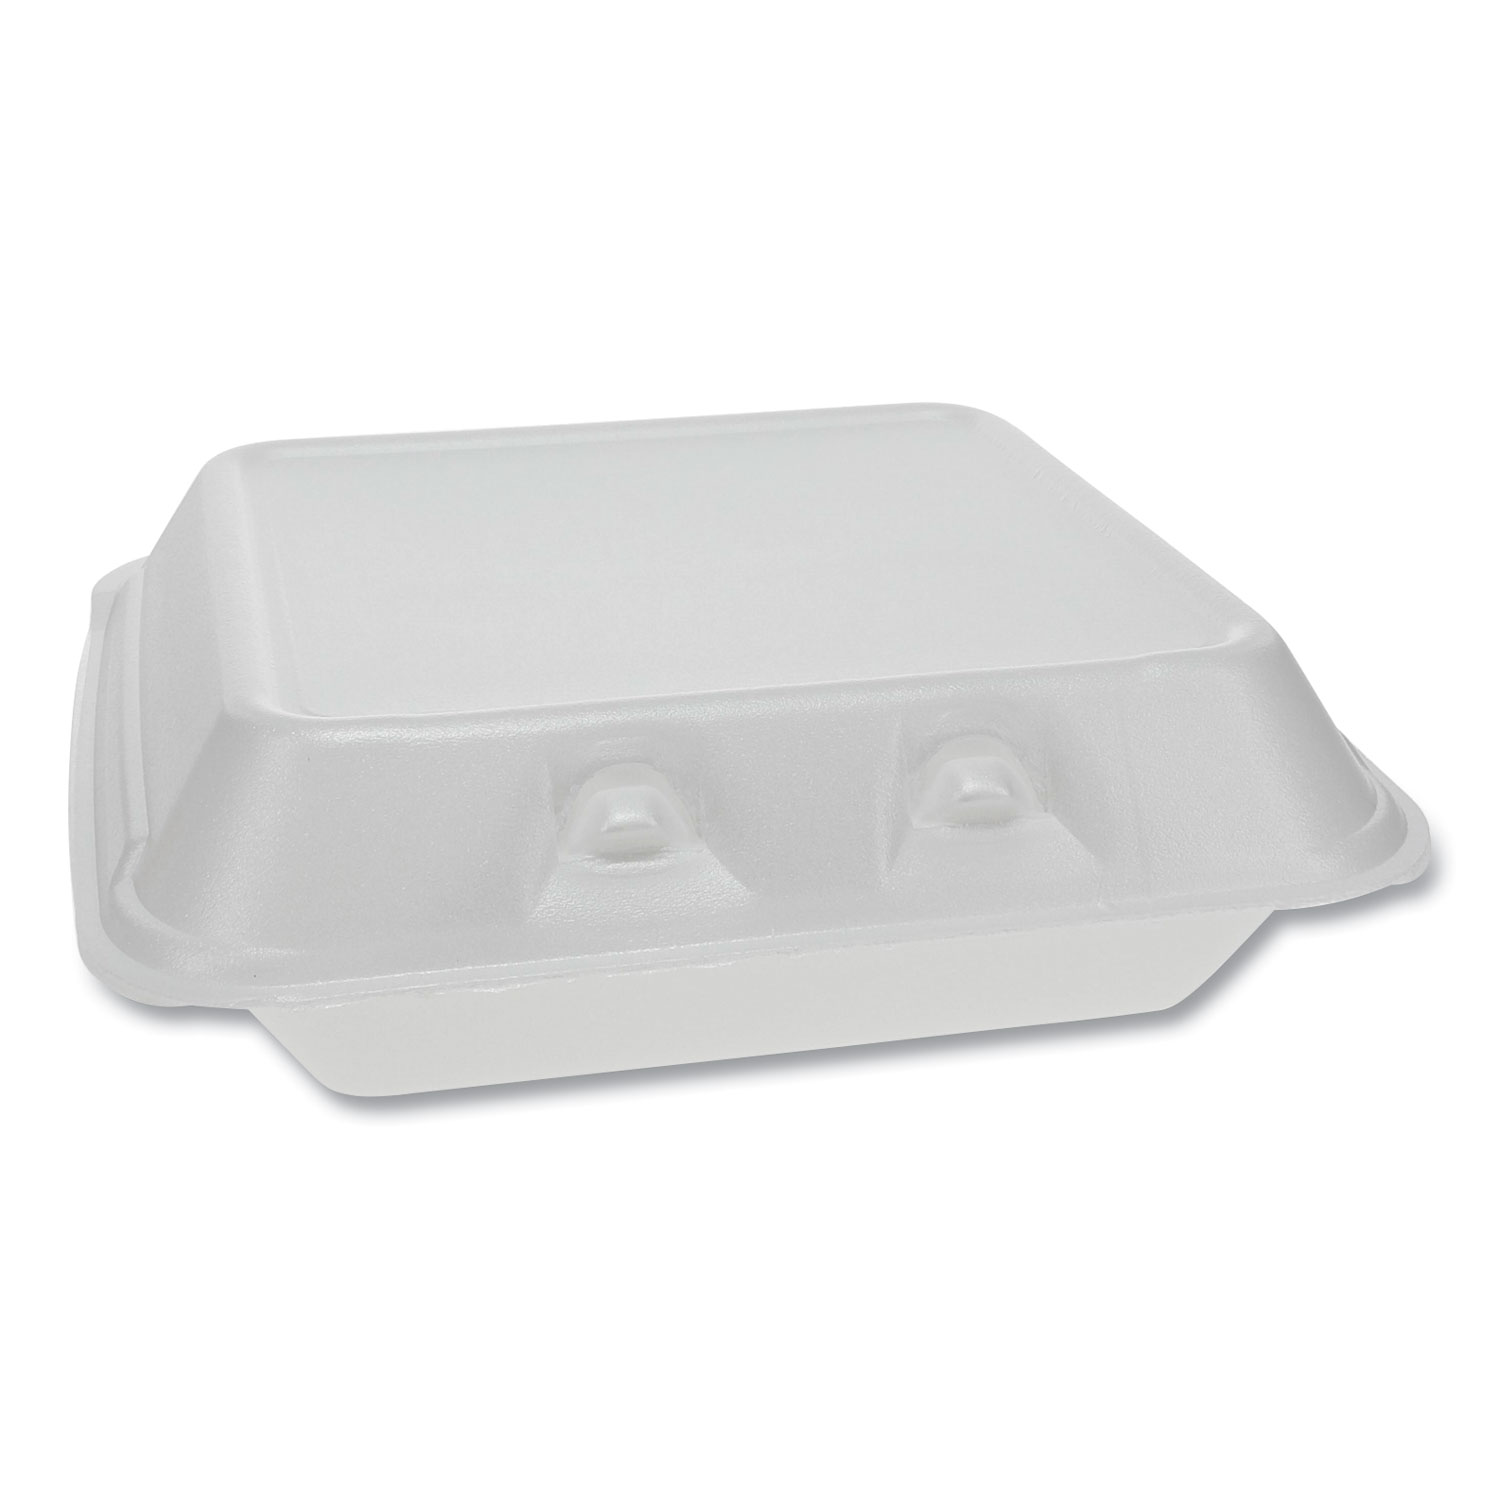  Pactiv YHLW07010000 SmartLock Foam Hinged Containers, Small, 7.5 x 8 x 2.63, 1-Compartment, White, 150/Carton (PCTYHLW07010000) 